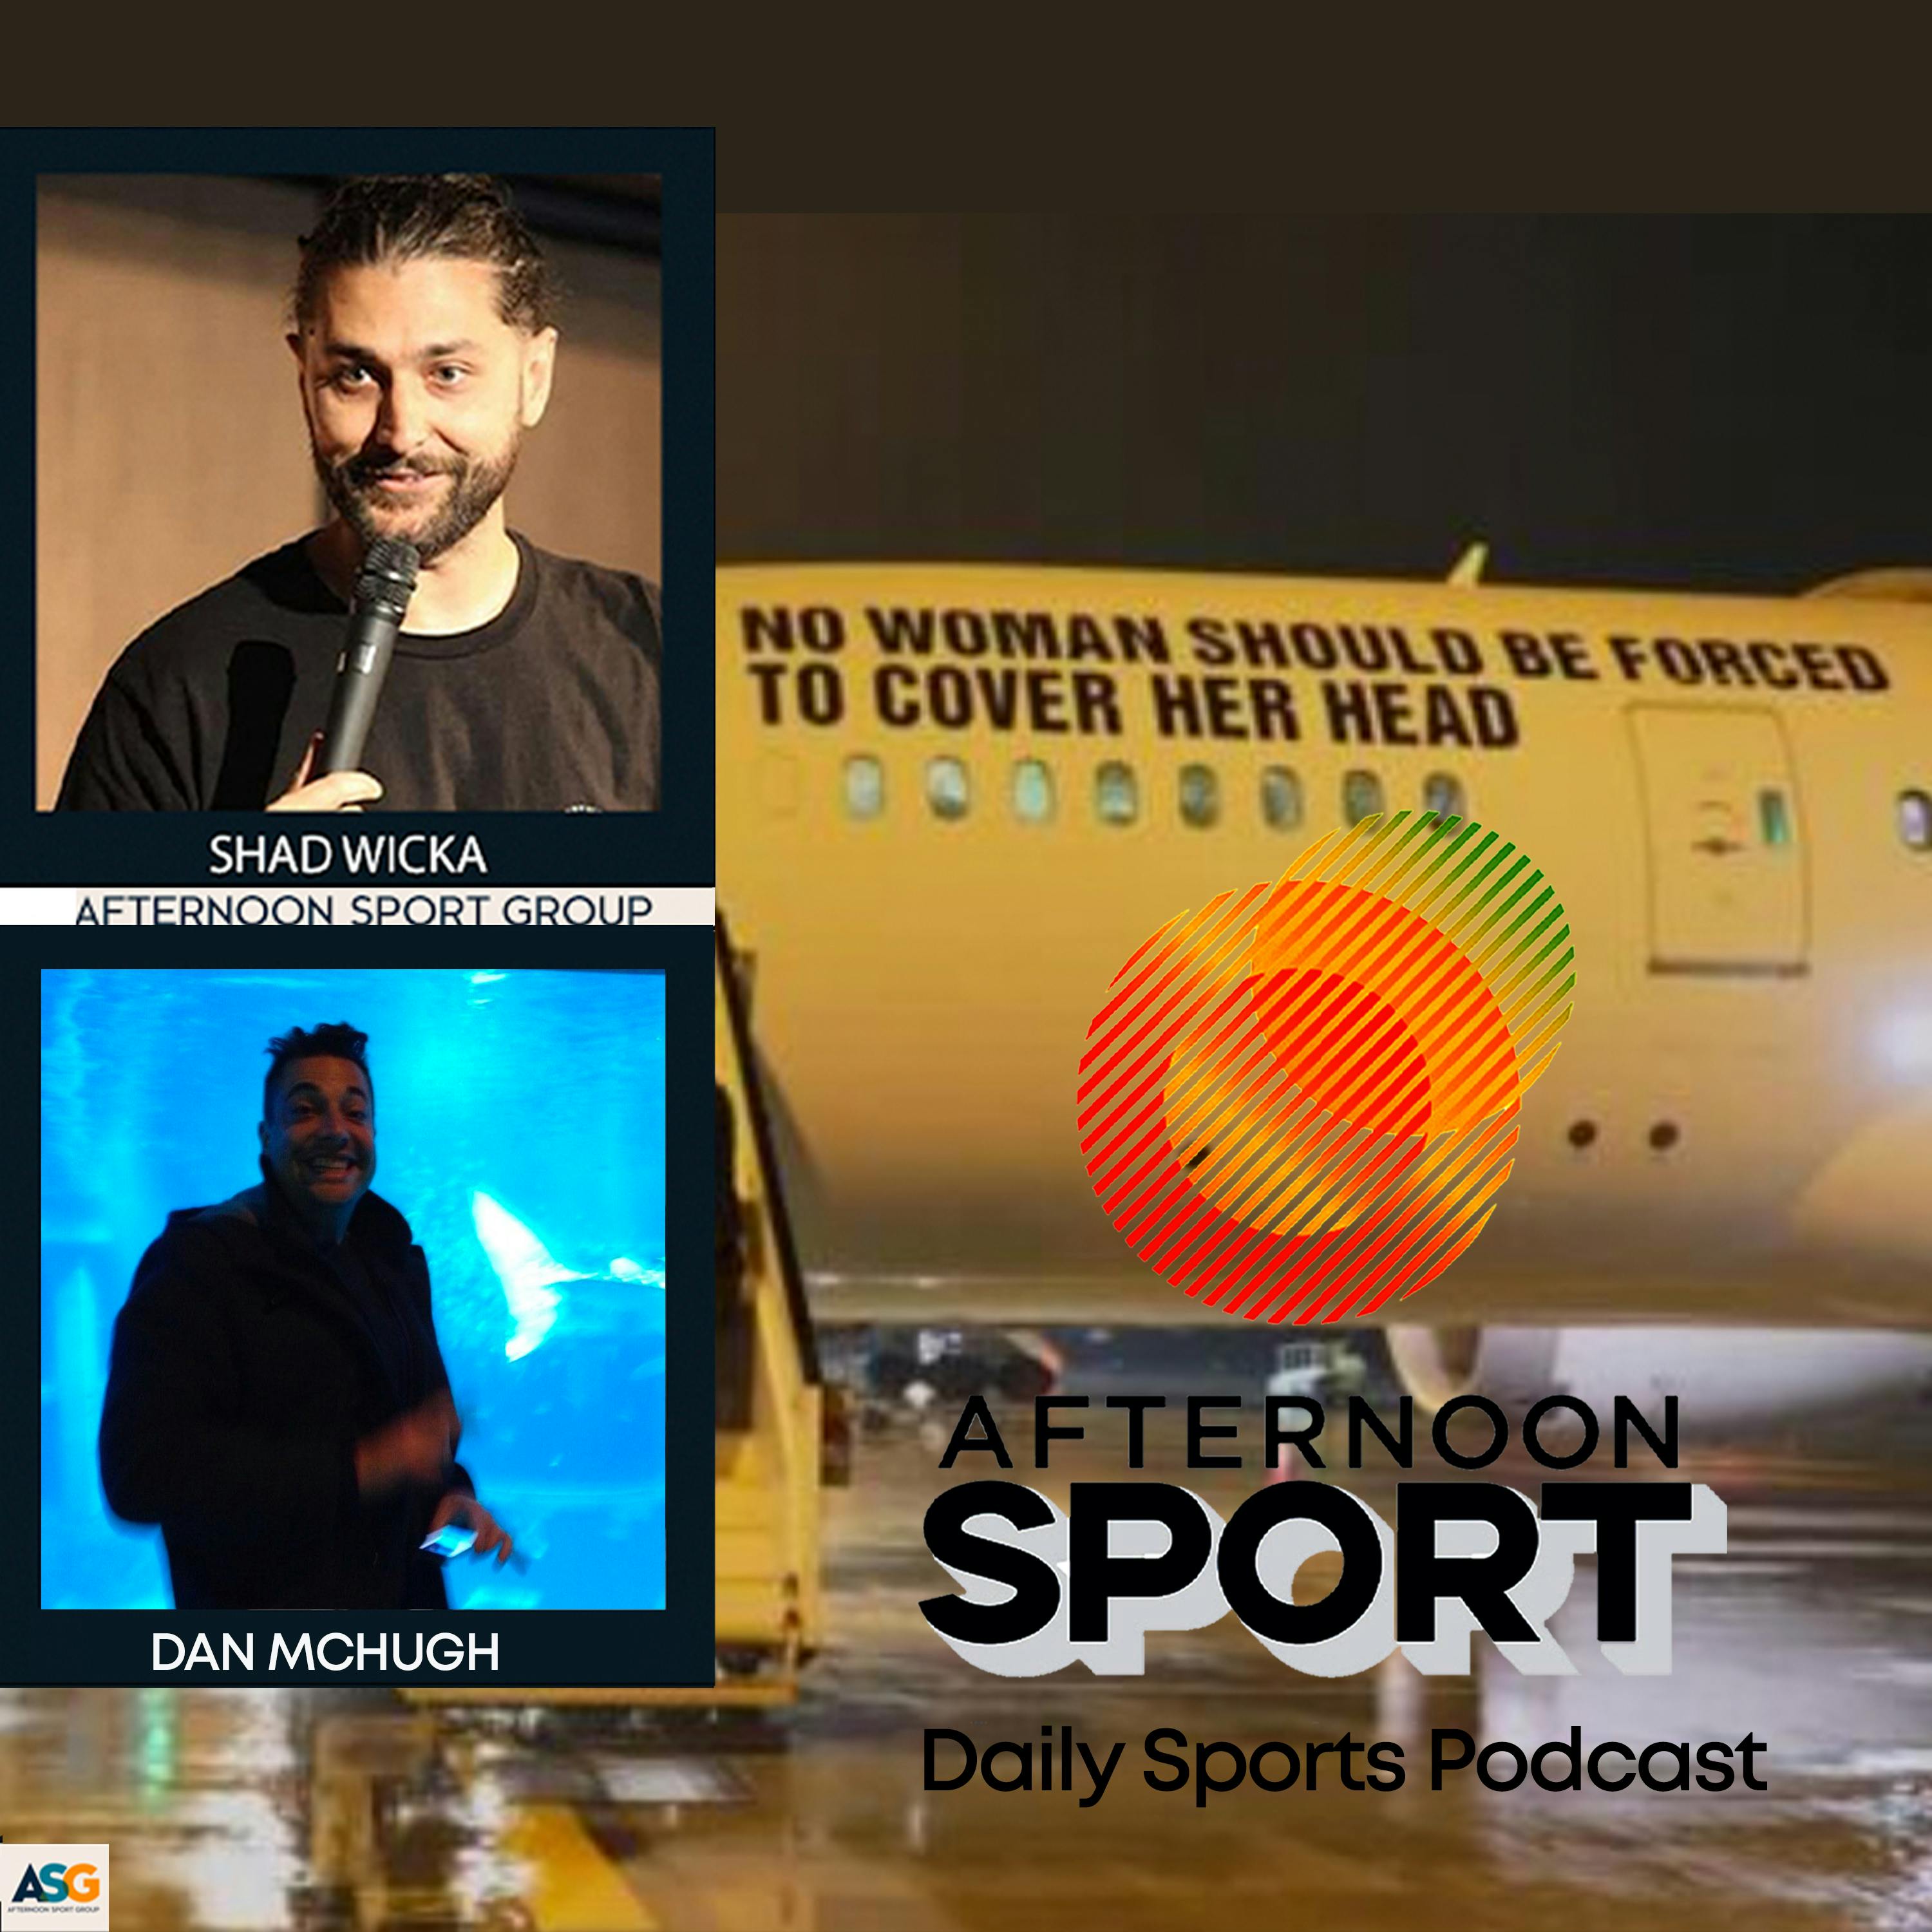 6th July Shad Wicka and Dan McHugh: Amen to the spirit of cricket, some great games at Wimbledon, teams arriving for the Women’s Wold Cup, NRL boycotts, AFL nude pics + more!